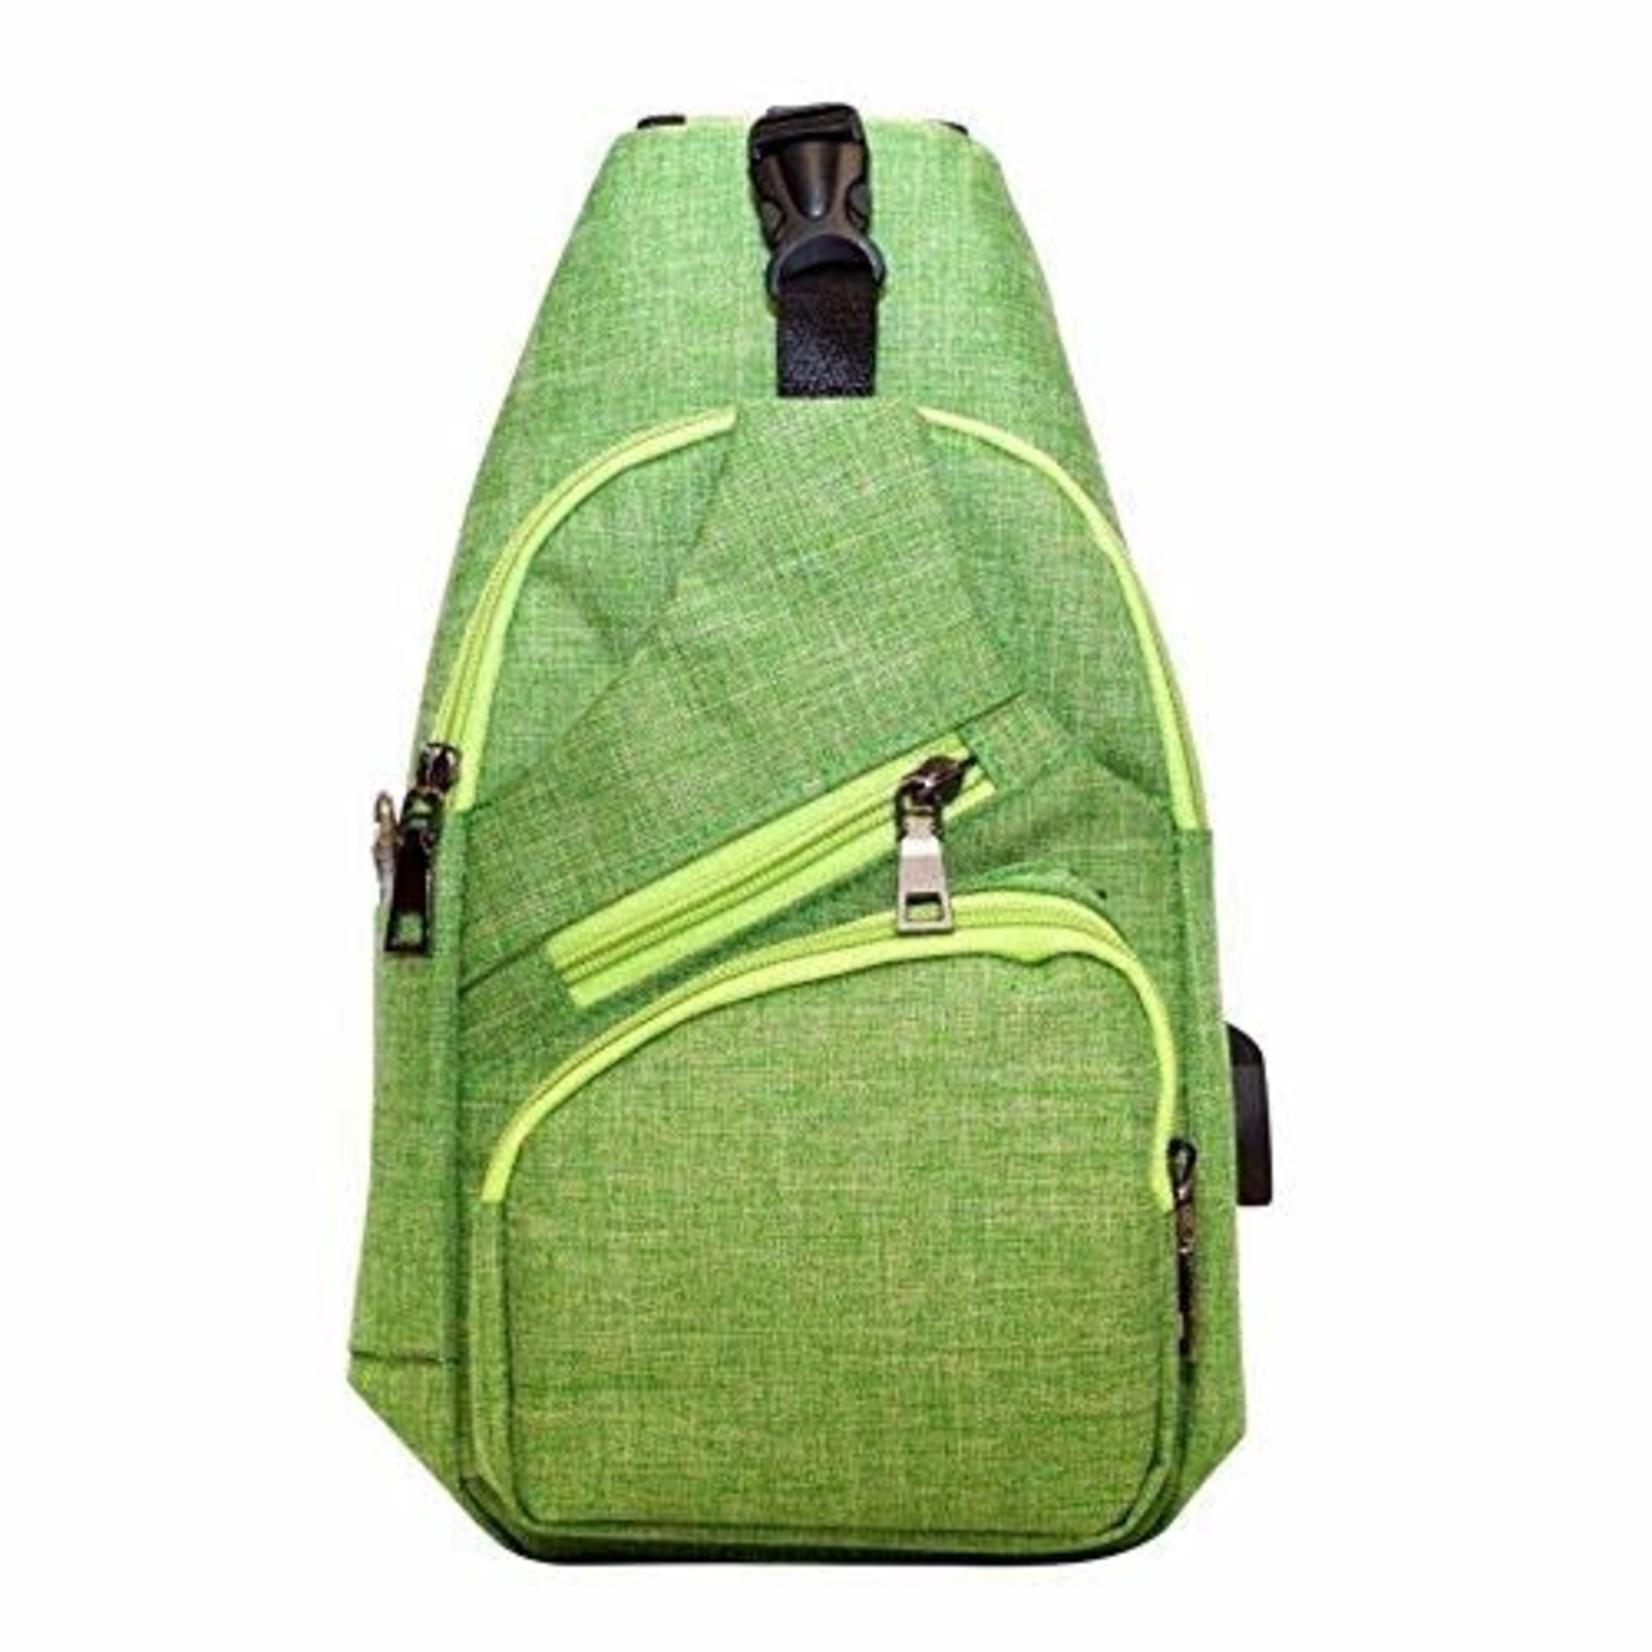 ANTI THEFT GREEN LG DAY PACK